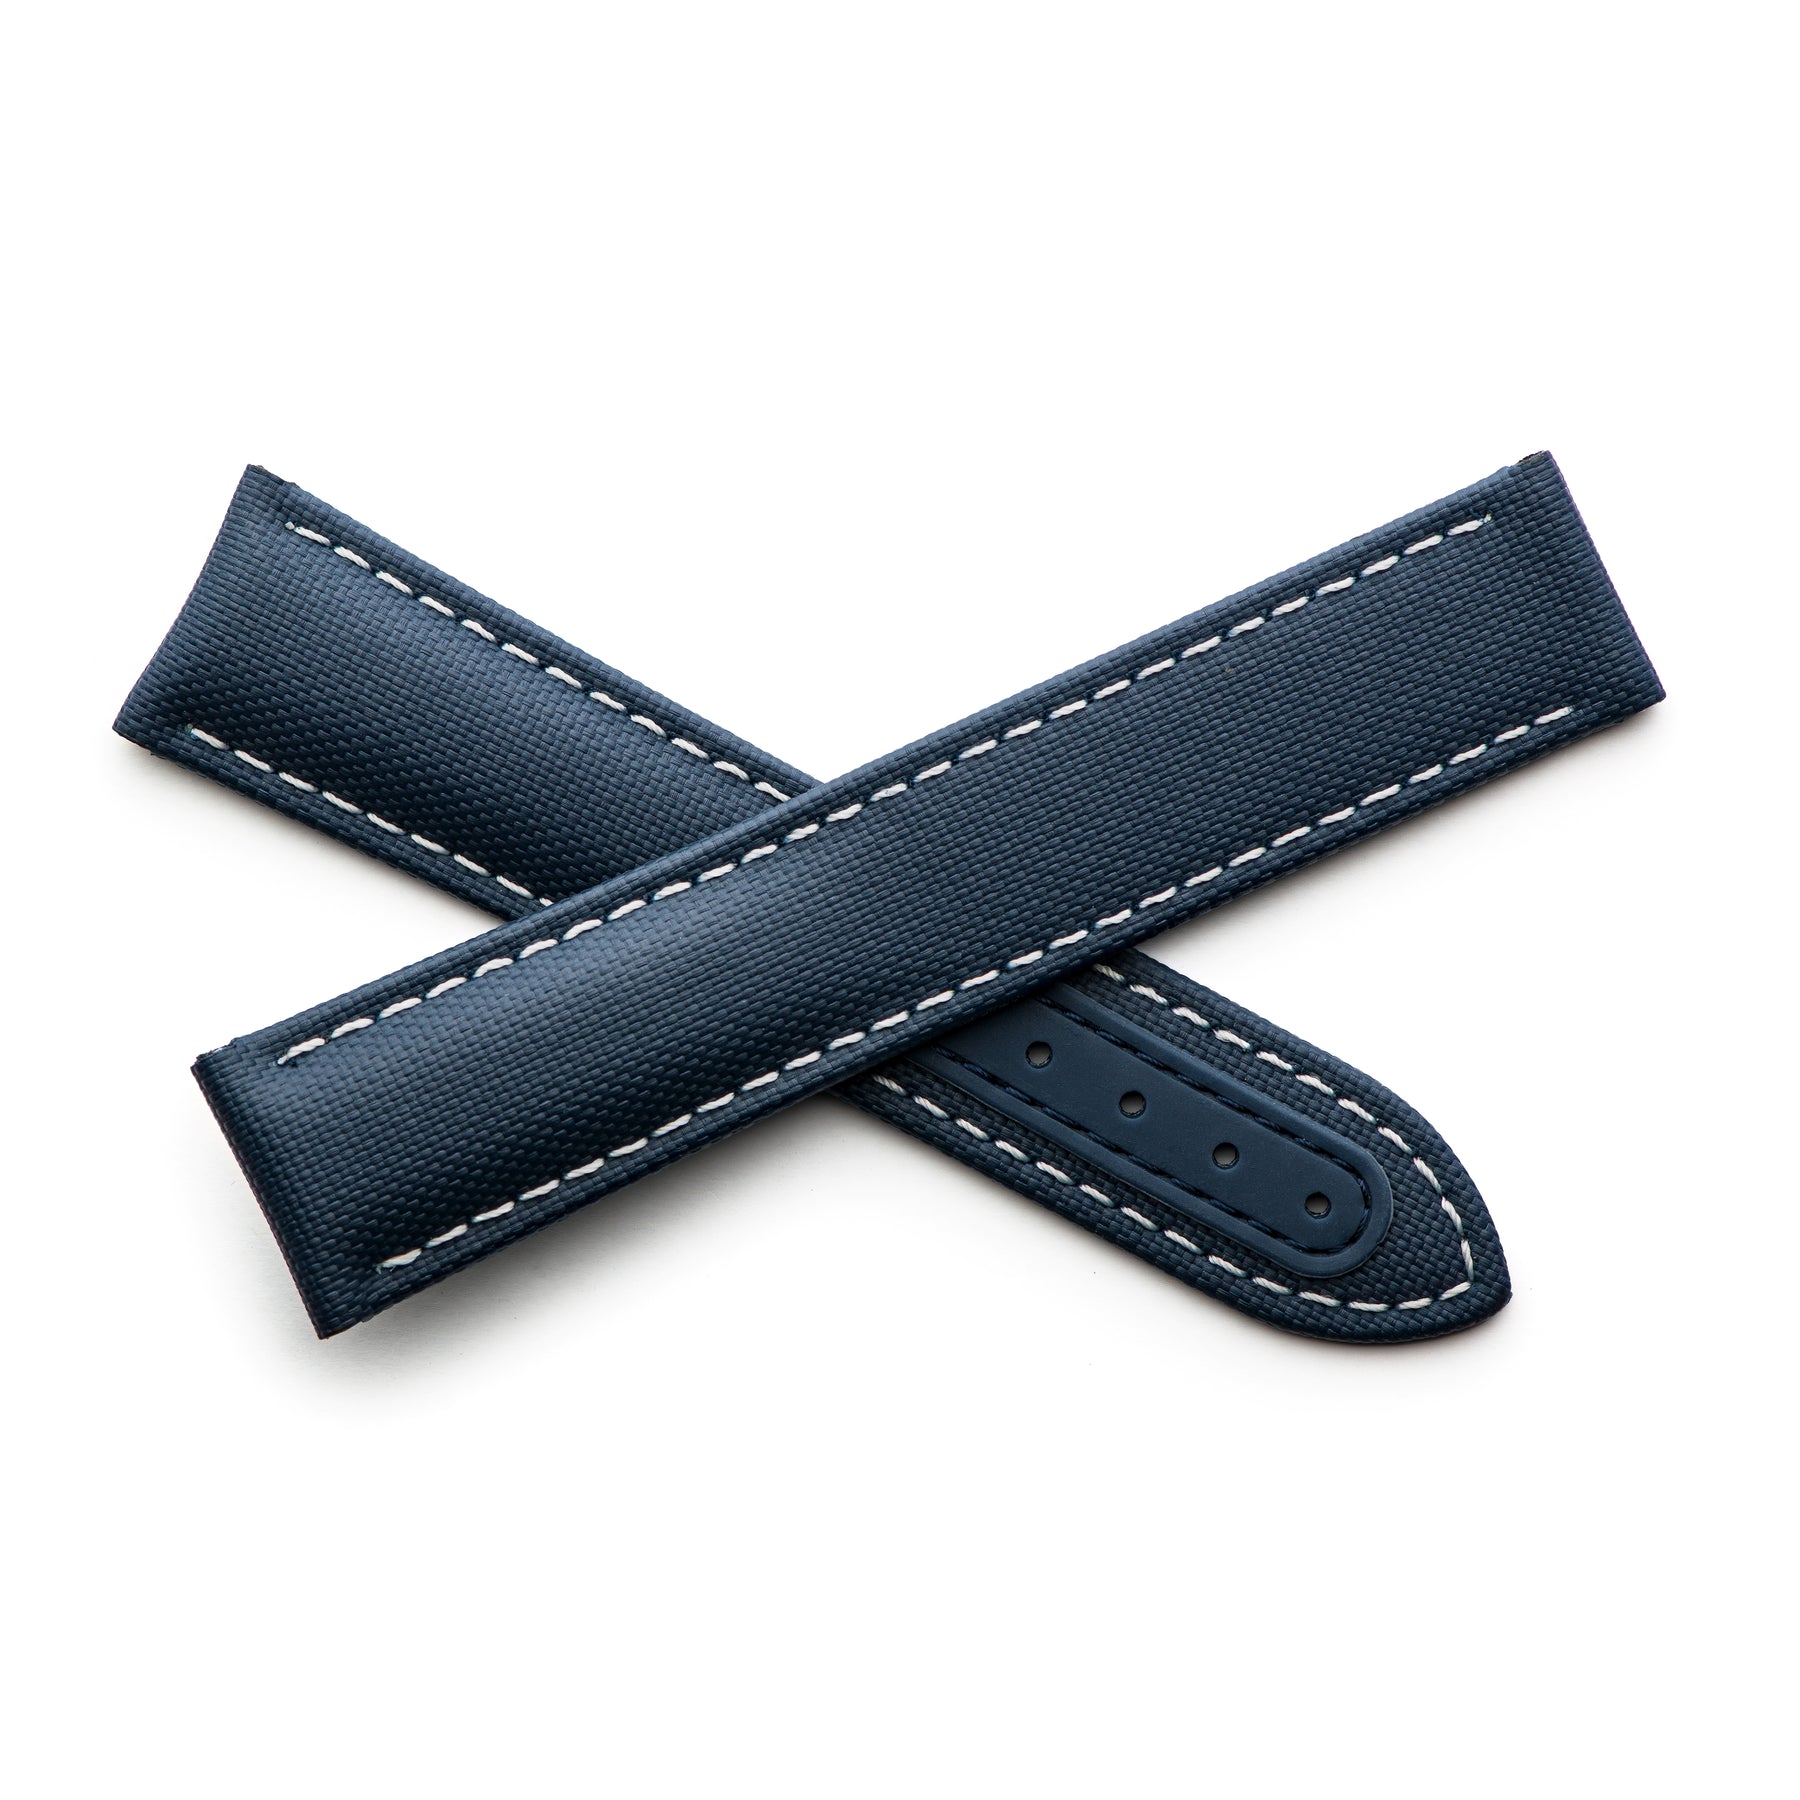 Loop-Less Navy Blue Sailcloth Watch Strap with White Stitching